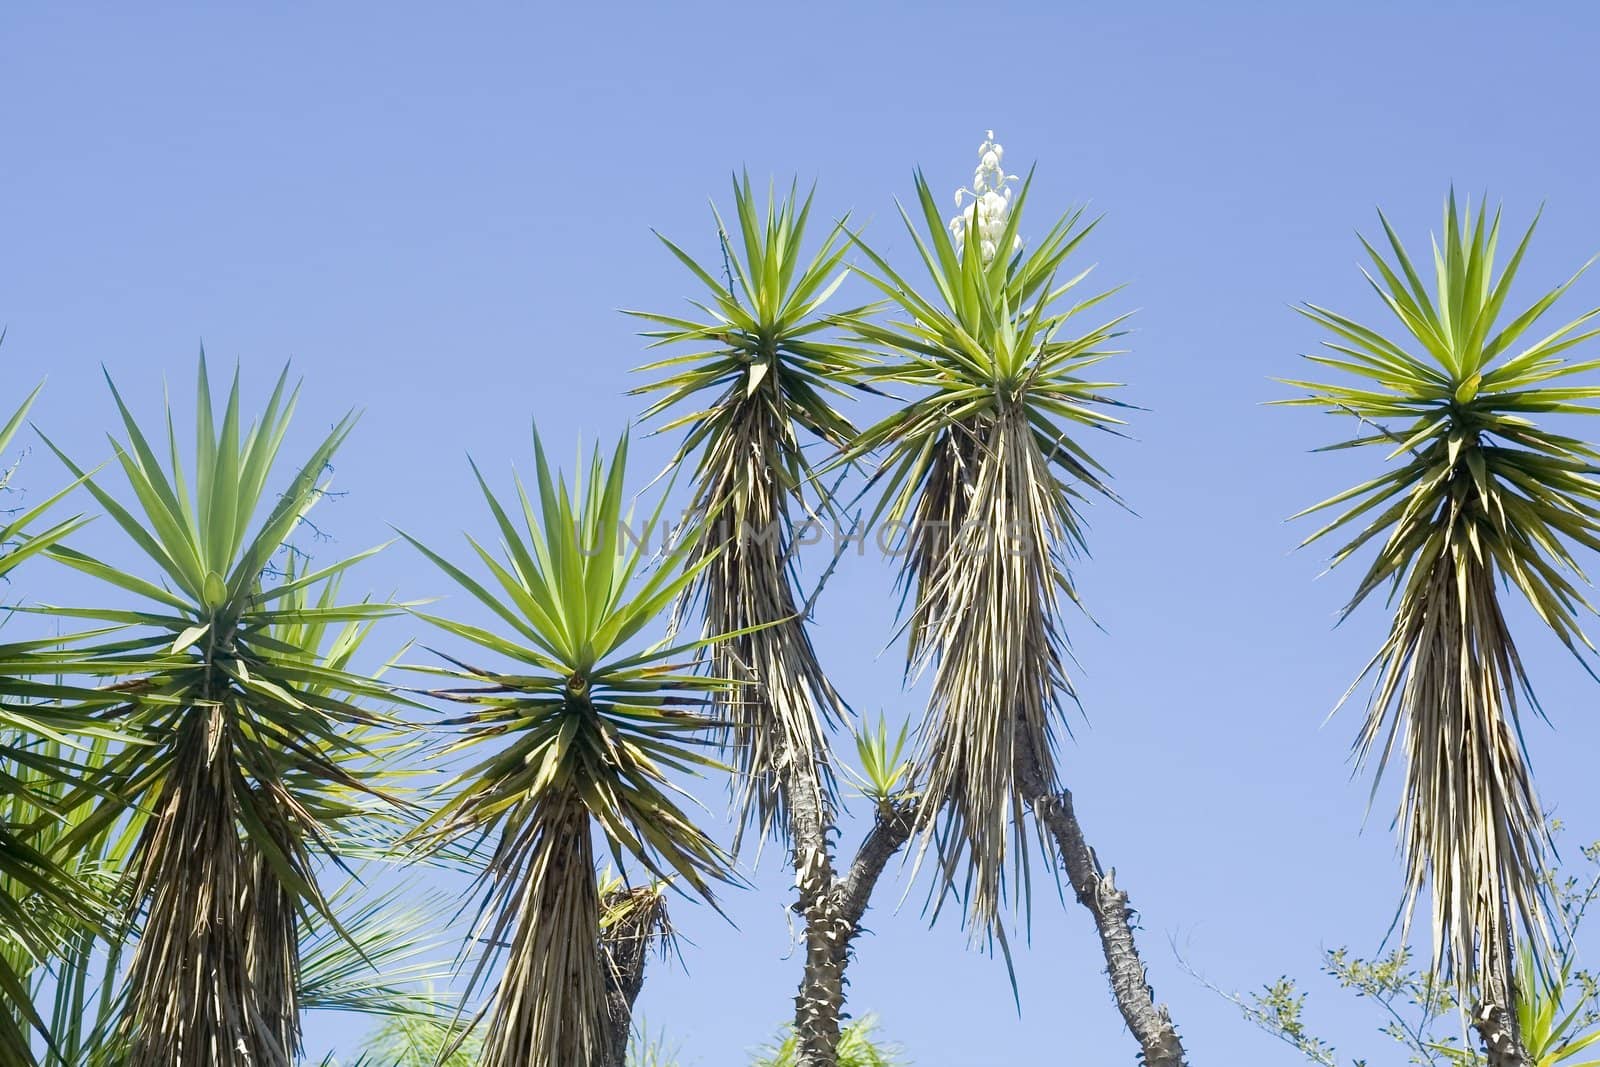 Flowering tropical plant yucca in nature on a background of blue sky